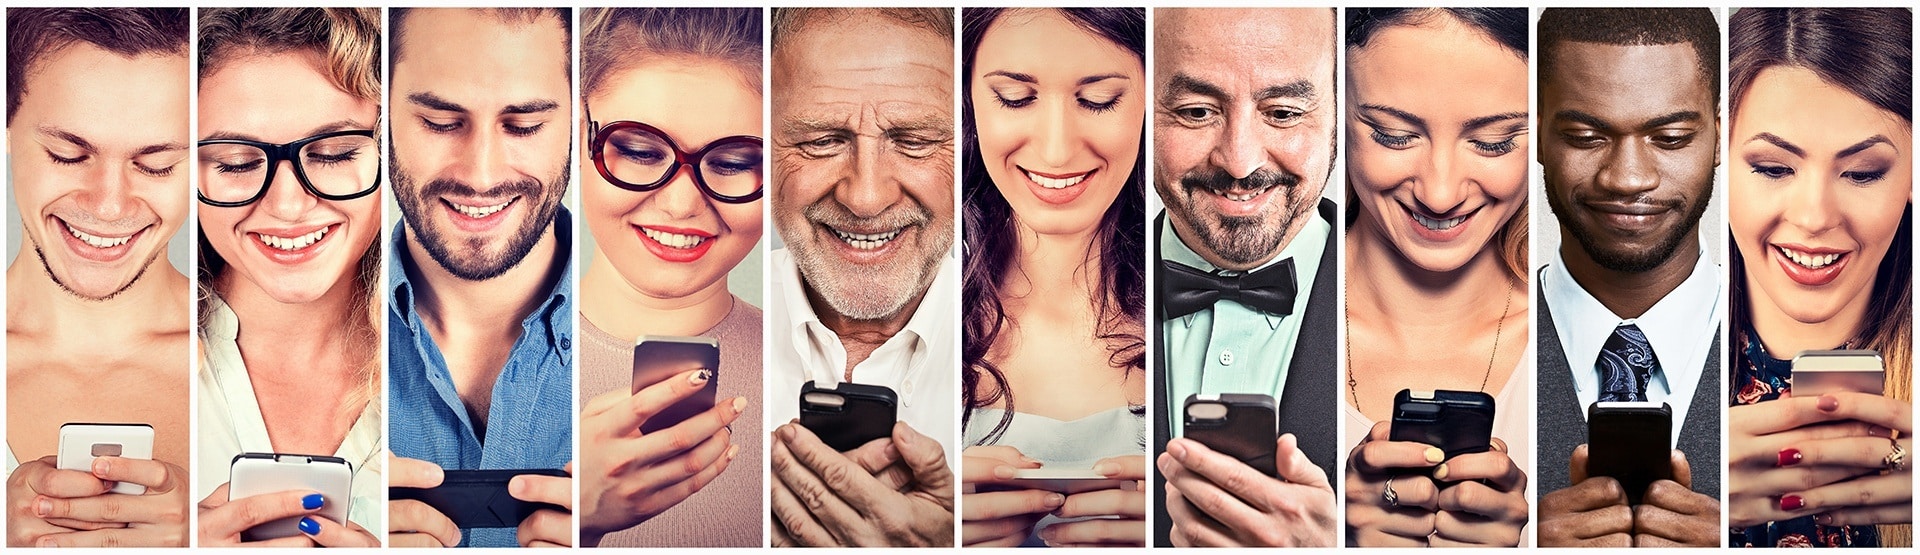 5 Ways to Make Money with Mobile Marketing Strategies